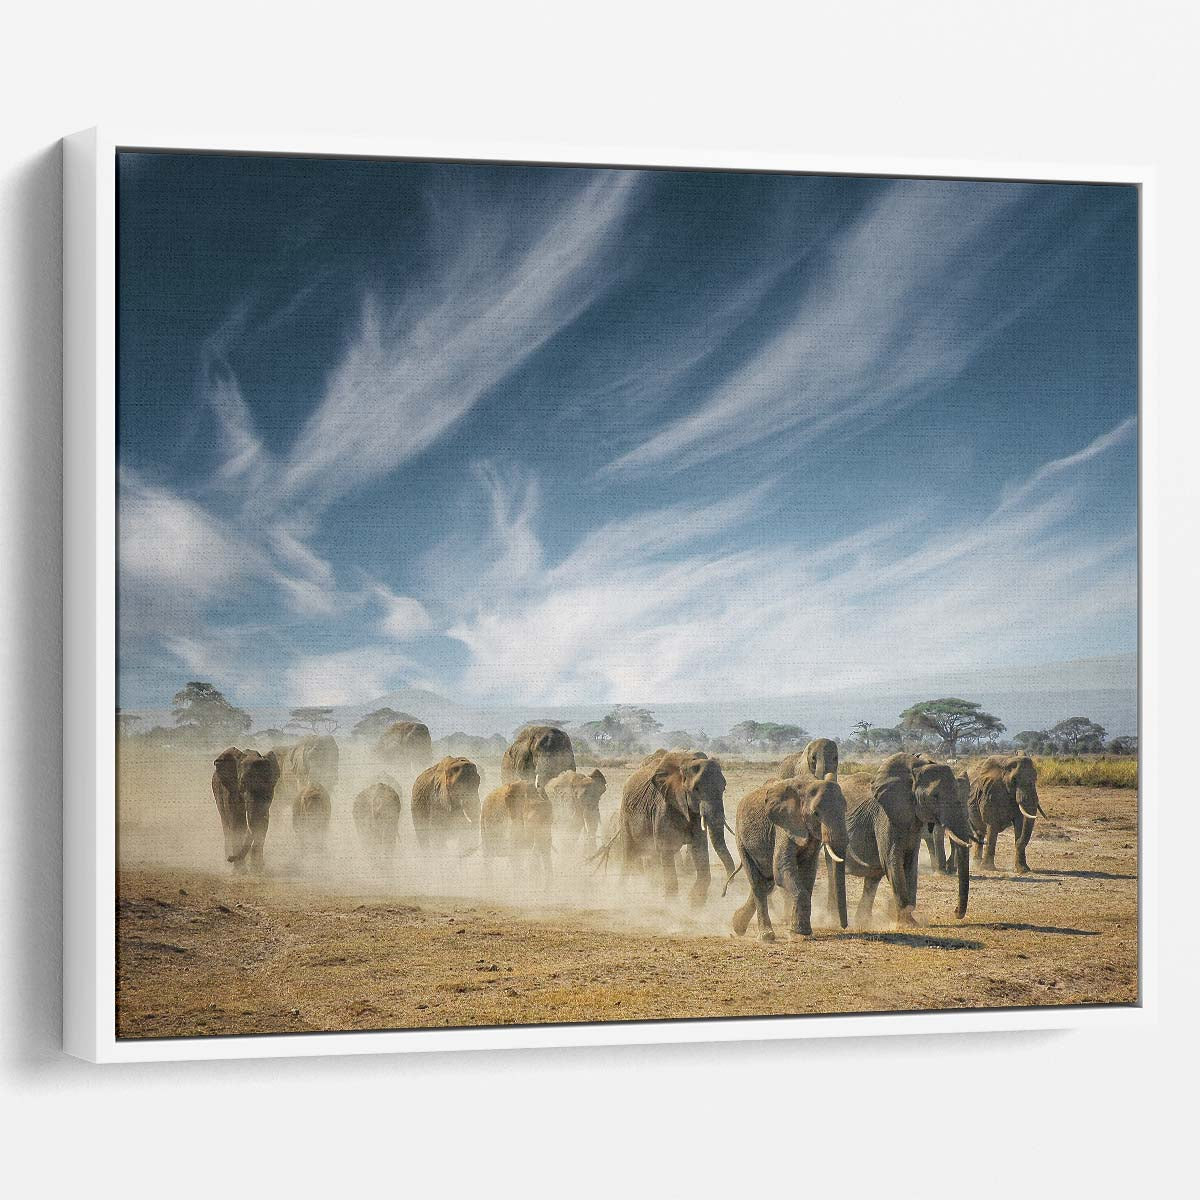 African Elephant Herd in Amboseli Park Wall Art by Luxuriance Designs. Made in USA.